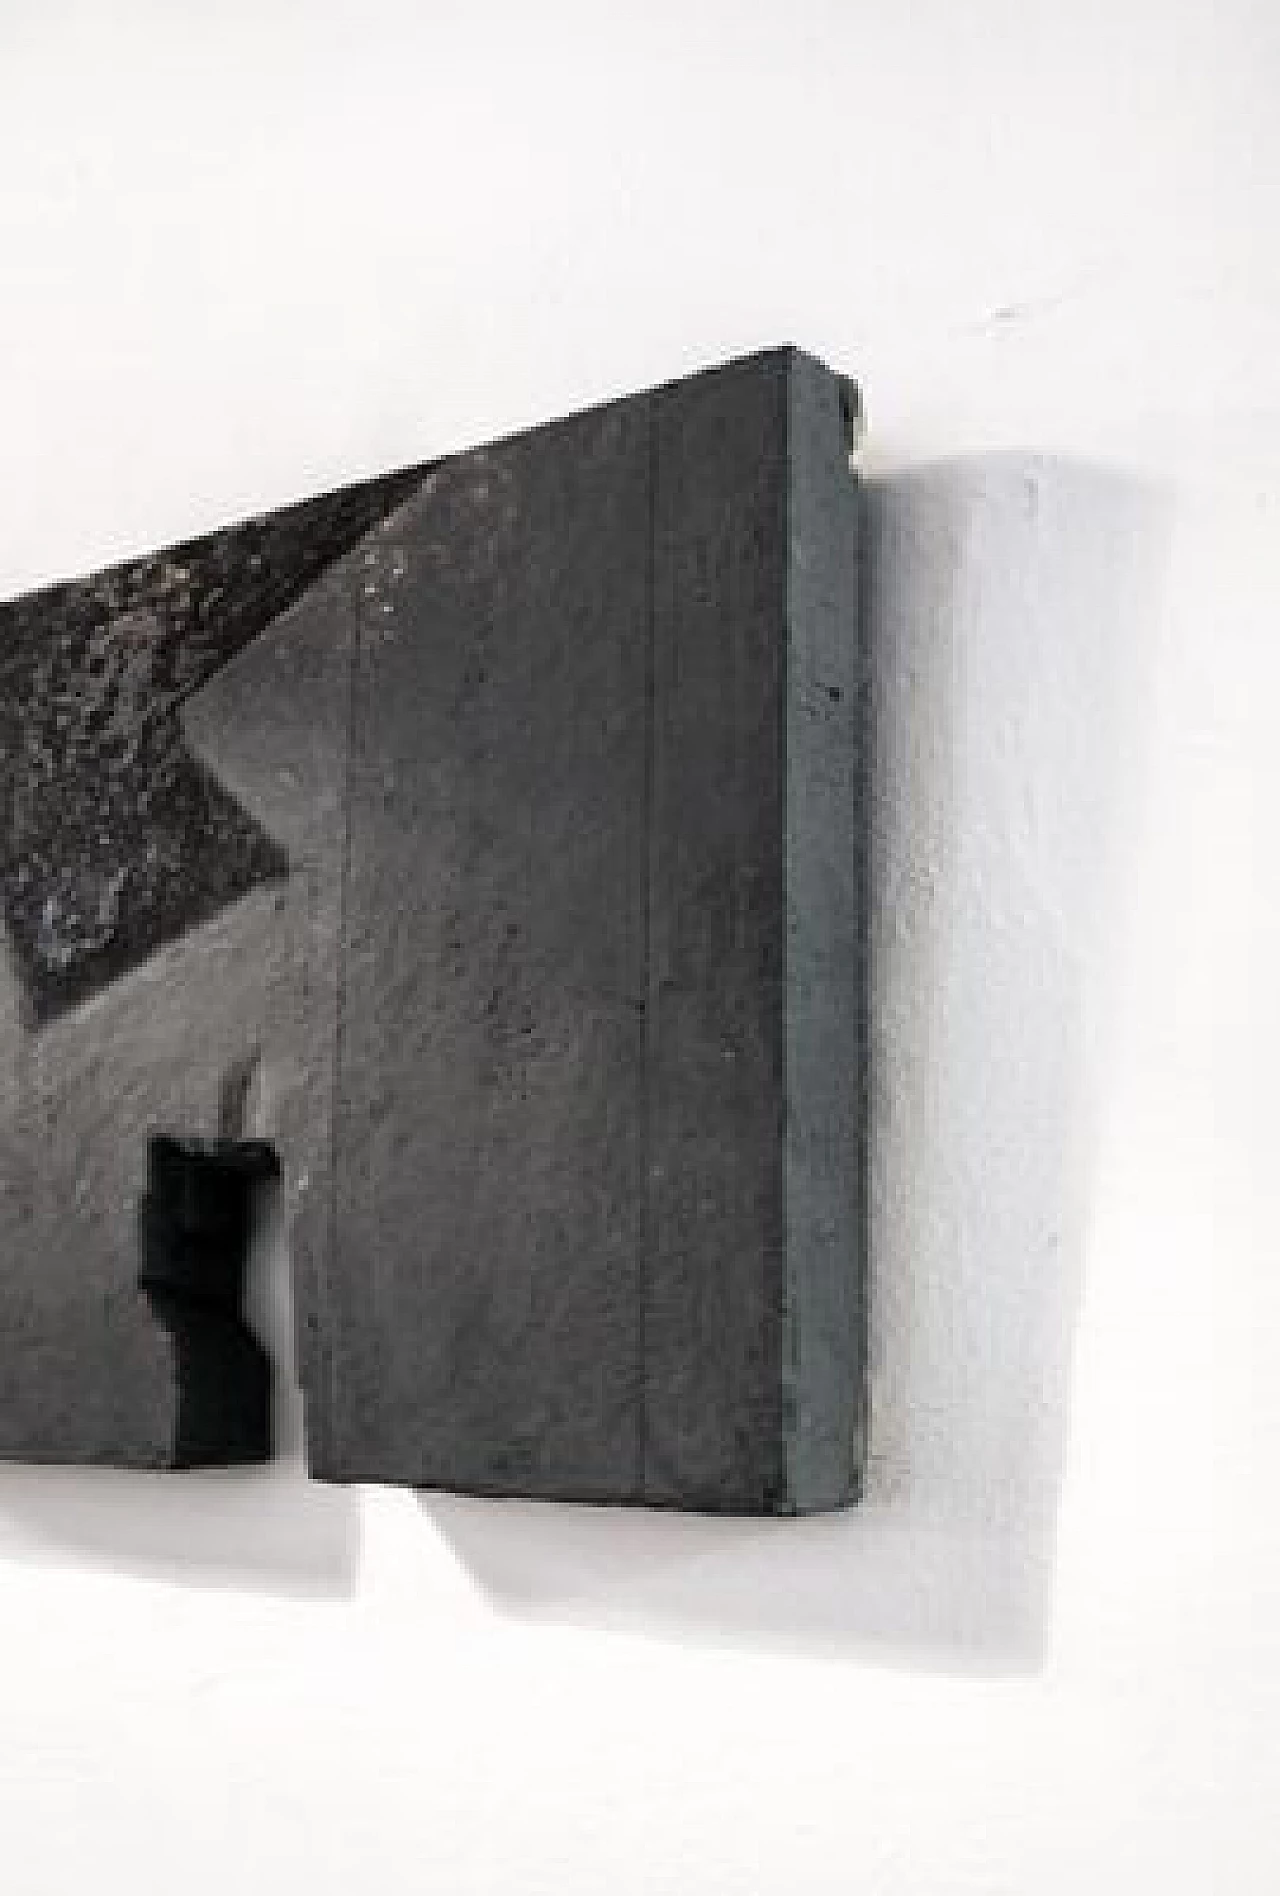 Marcello Jori, painting, grey and black polychrome on wood , 1986 3